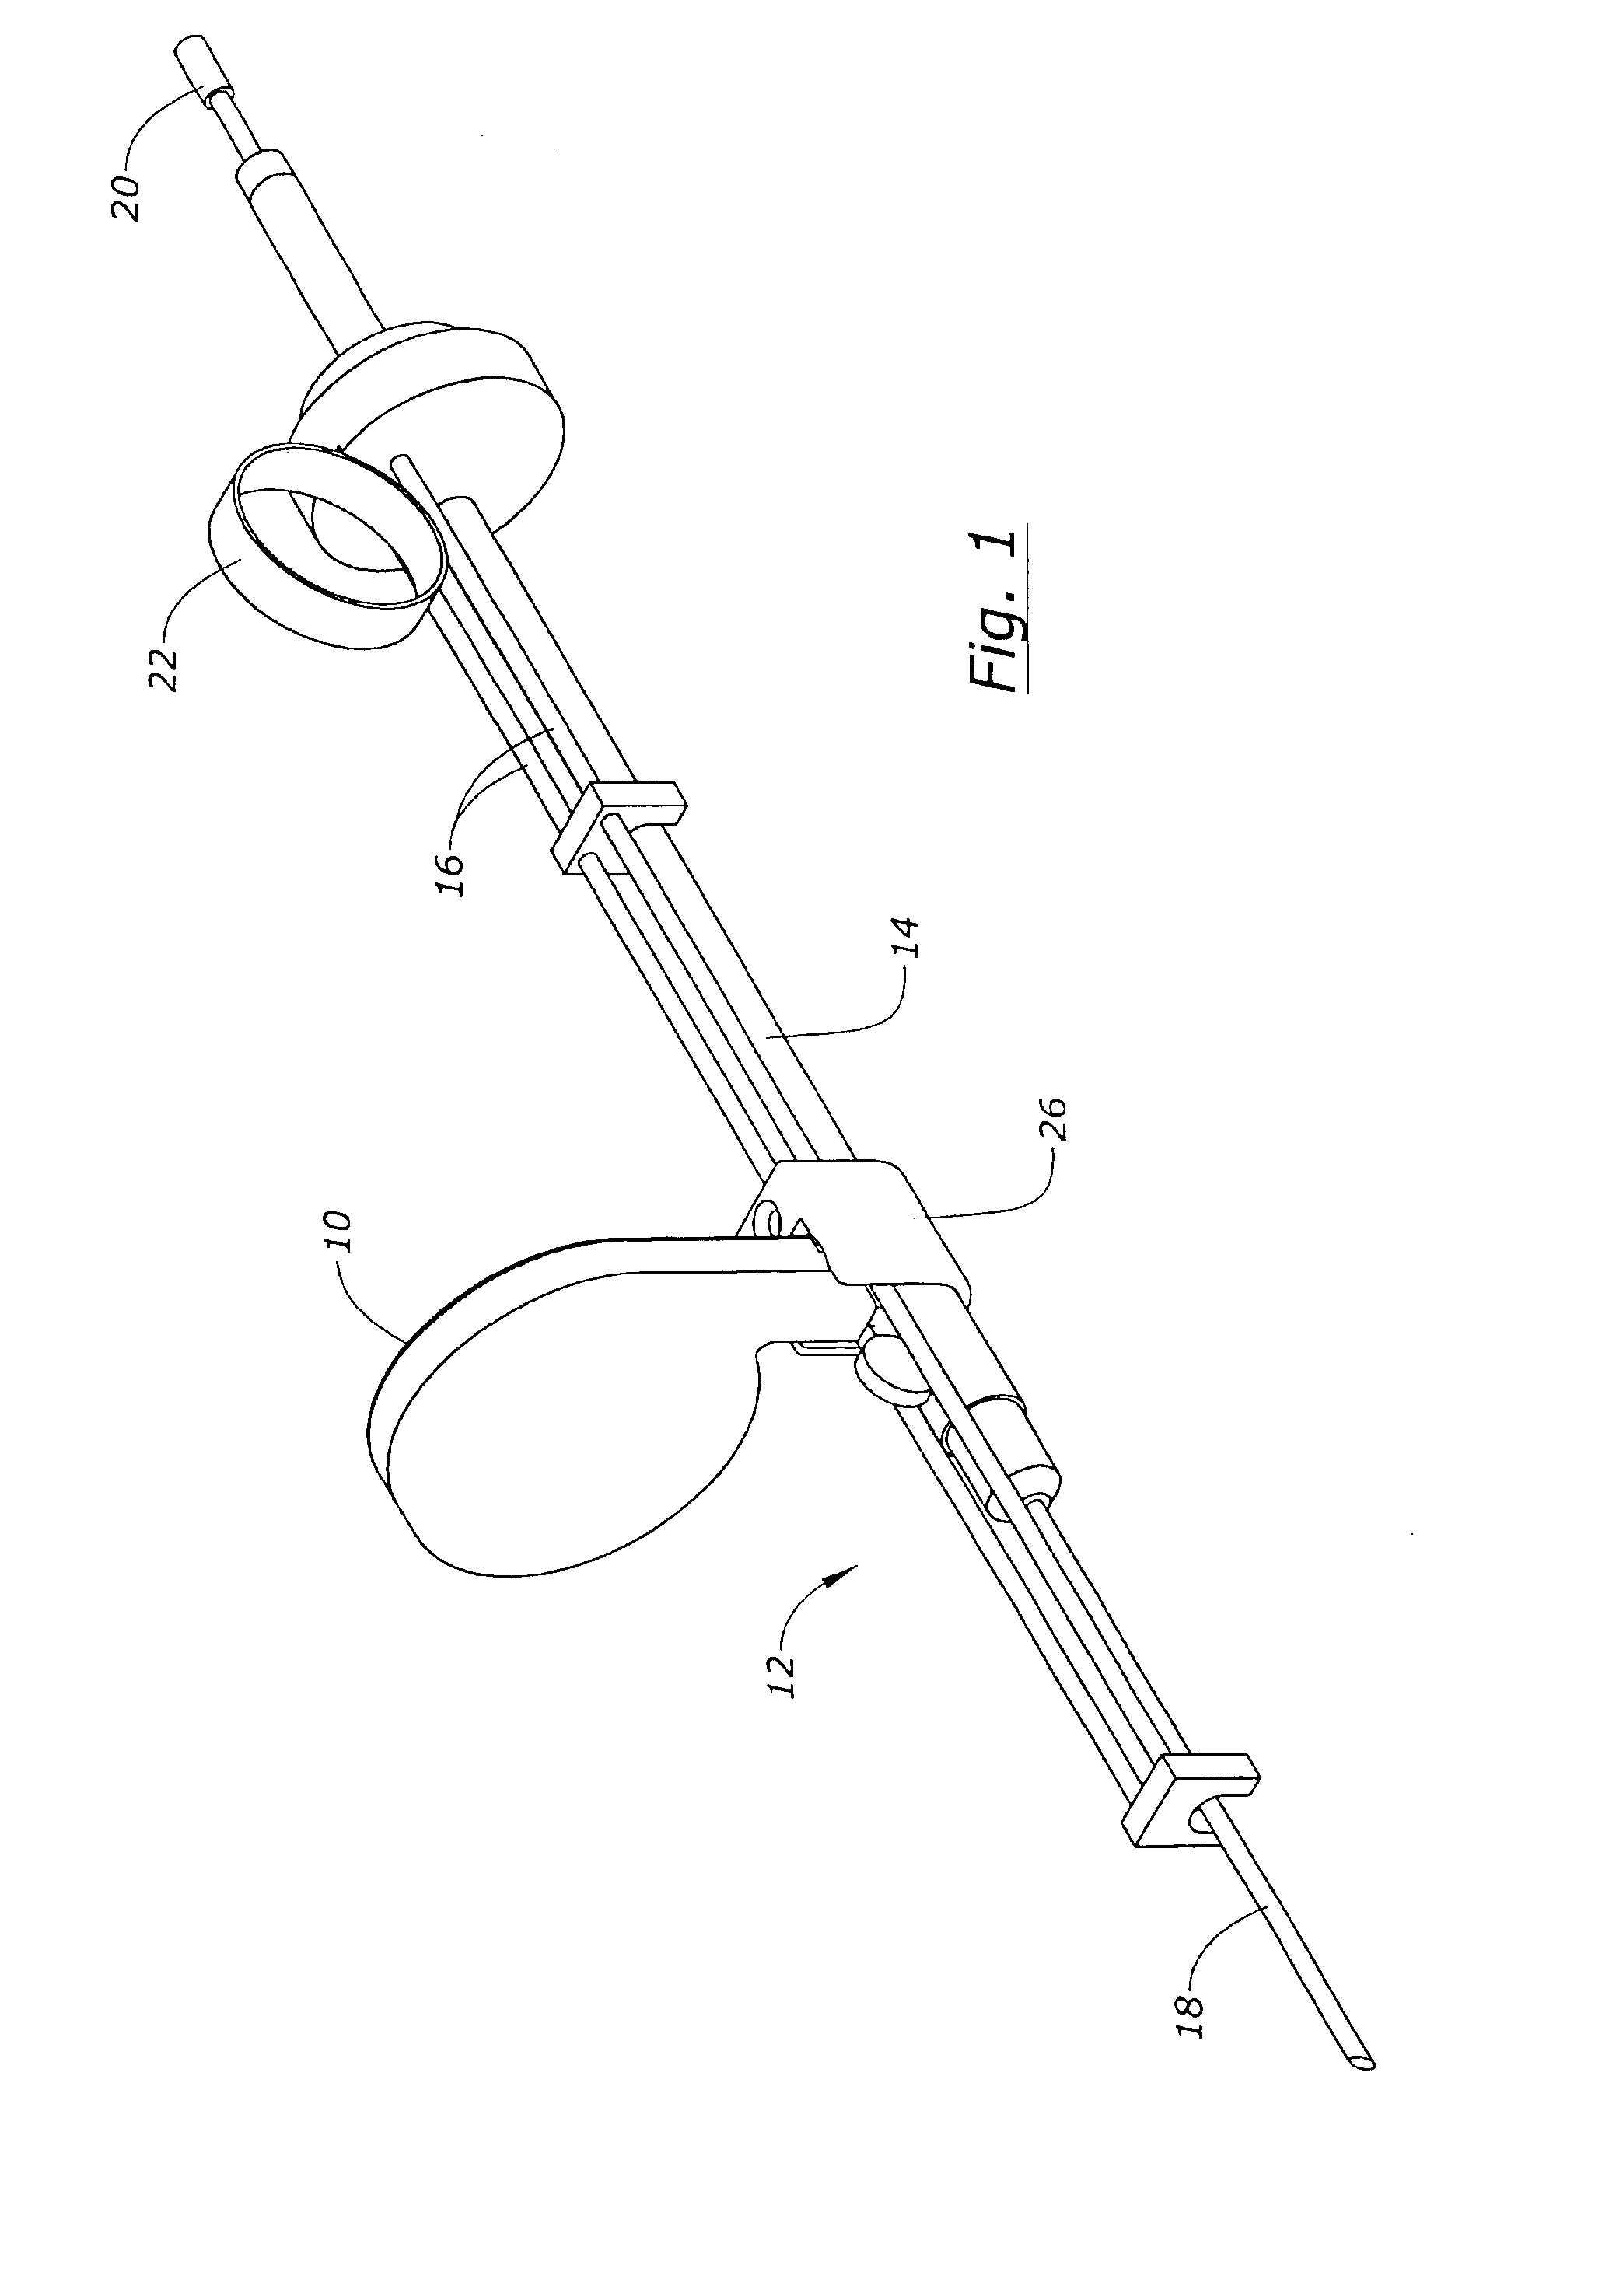 Seed cartridge for radiation therapy